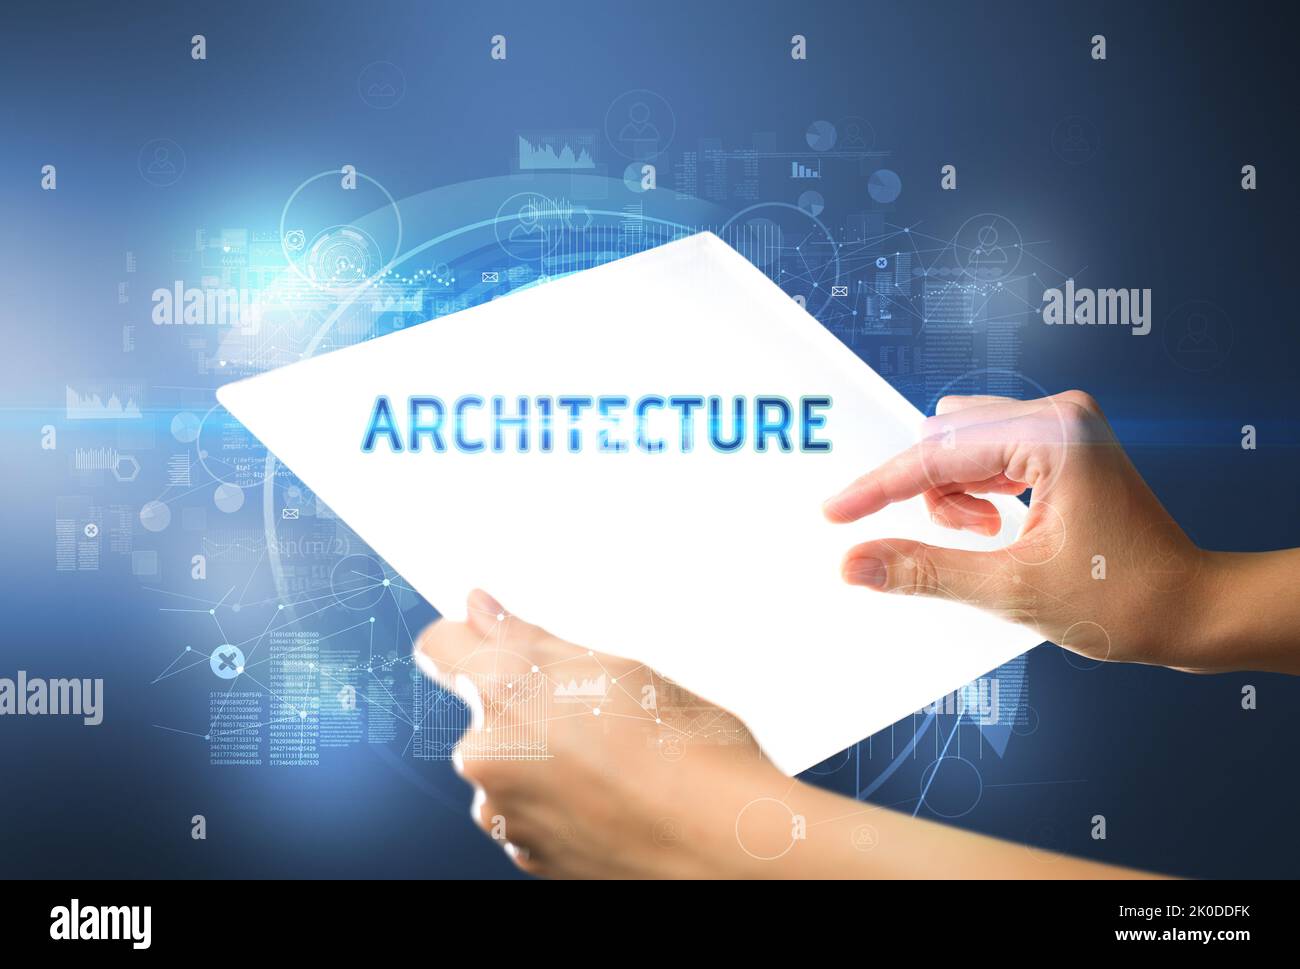 Hand holdig futuristic tablet , technology concept Stock Photo